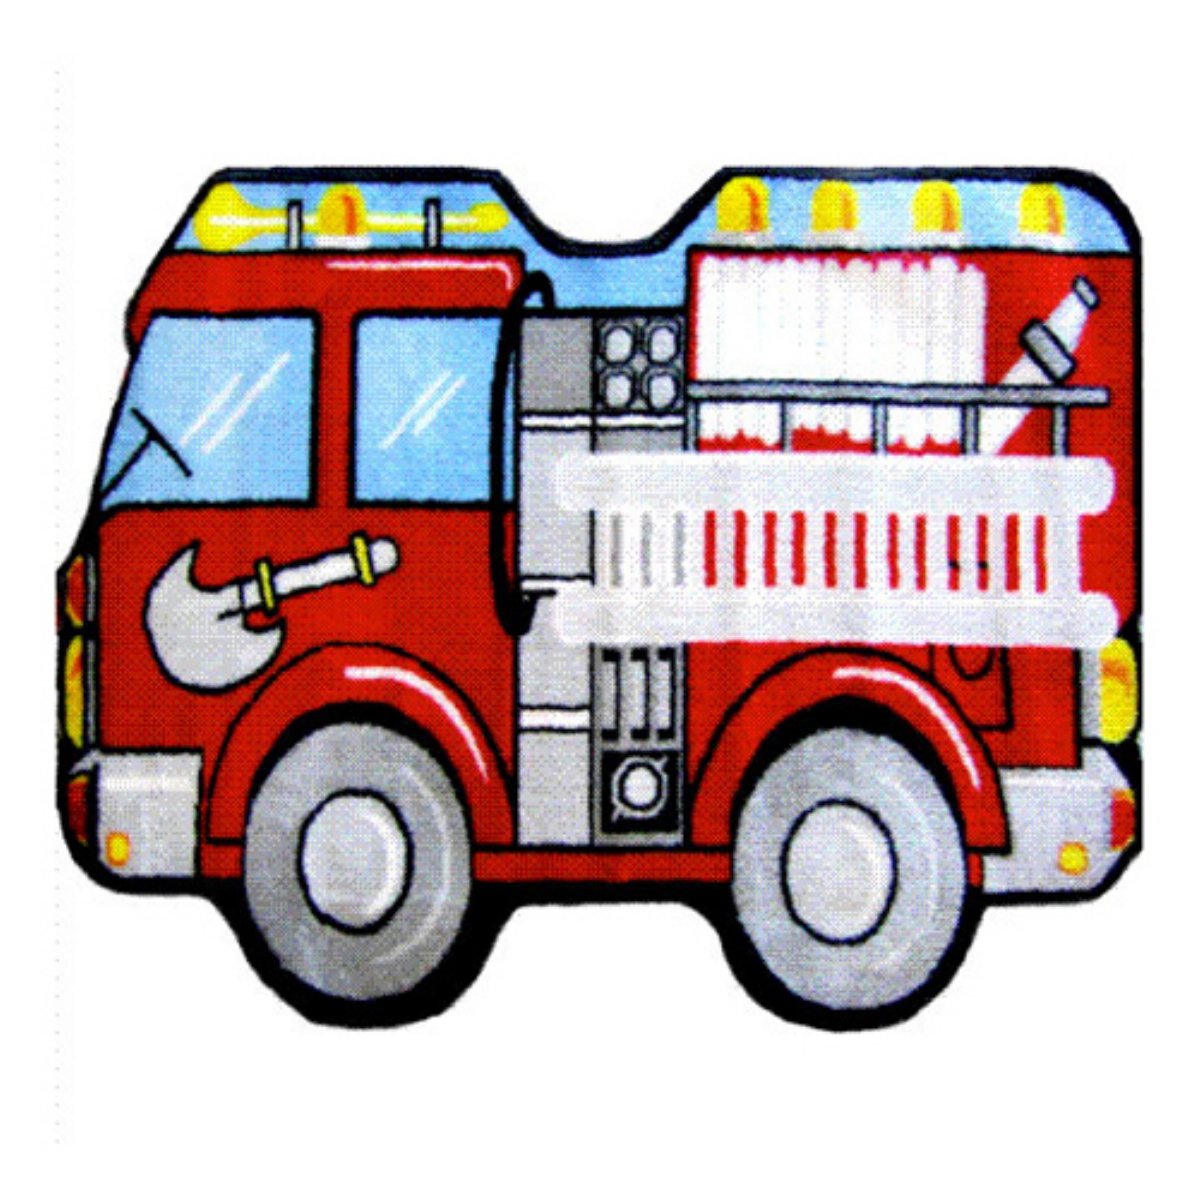 L.A. Rugs Fire Engine Kids Area Rug - Childrens Decor at Hayneedle